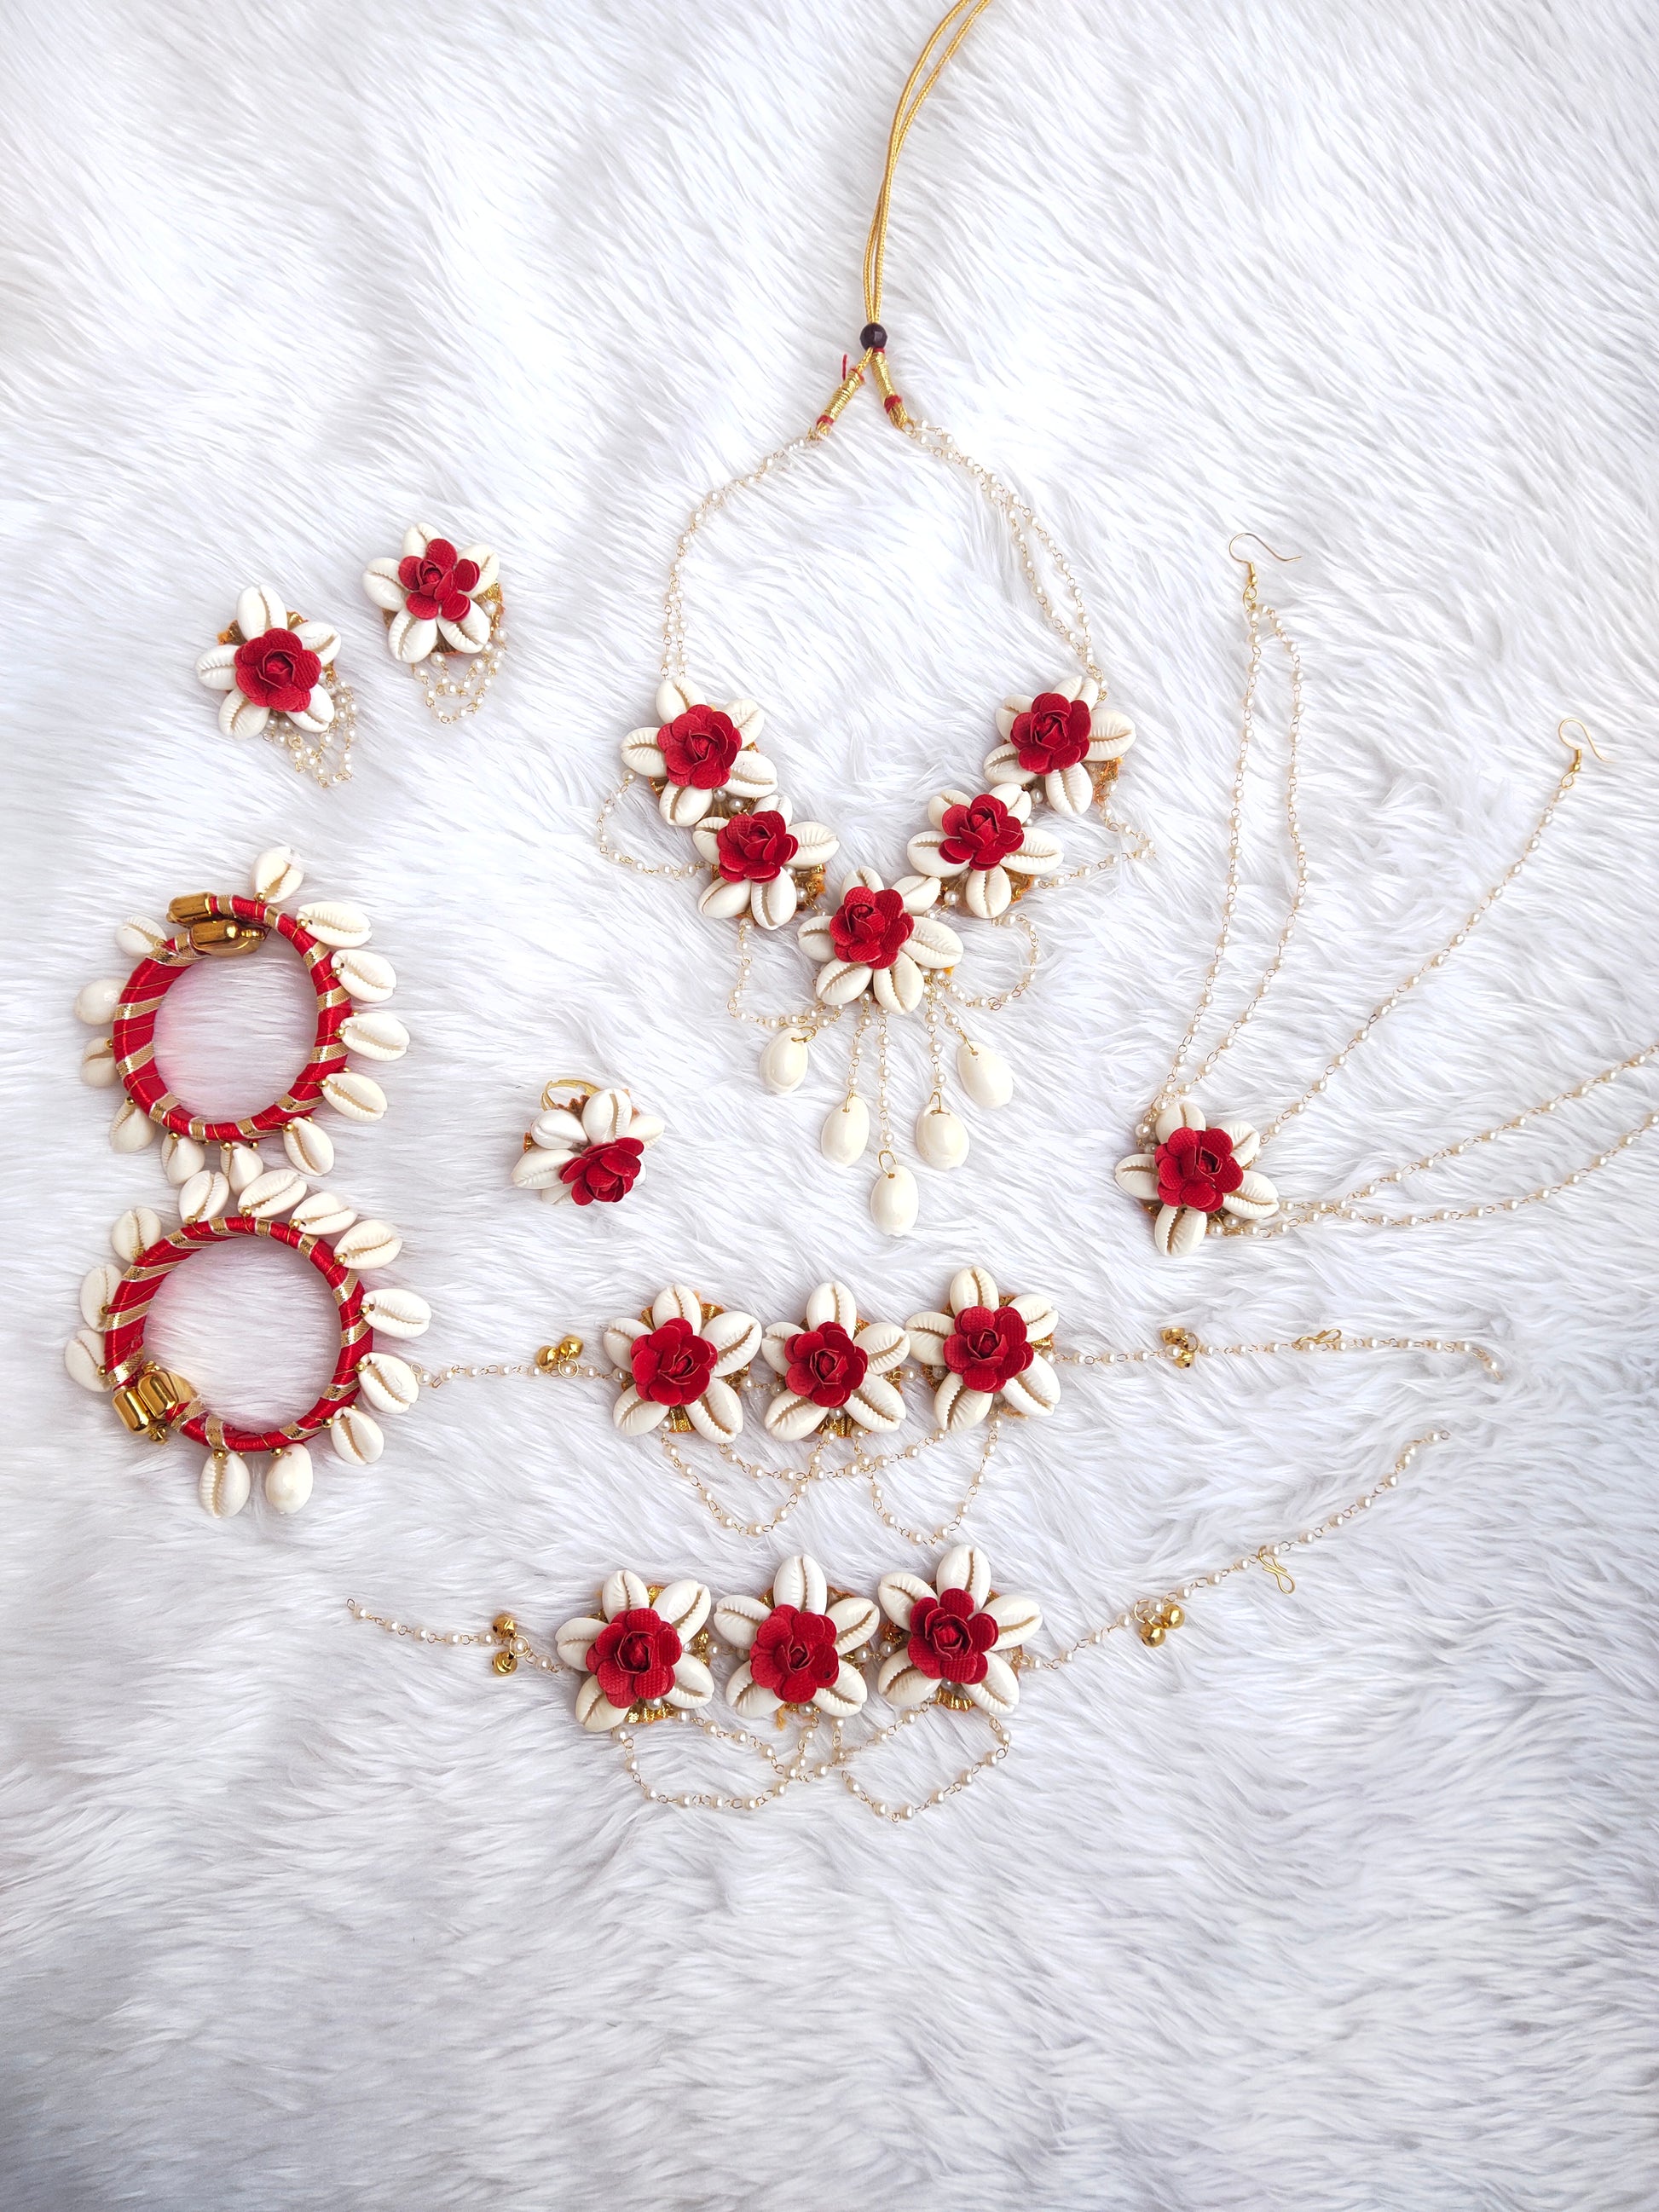 Red shell jewellery that can be worn for haldi ceremonies and baby showers will add a touch of beauty and romance